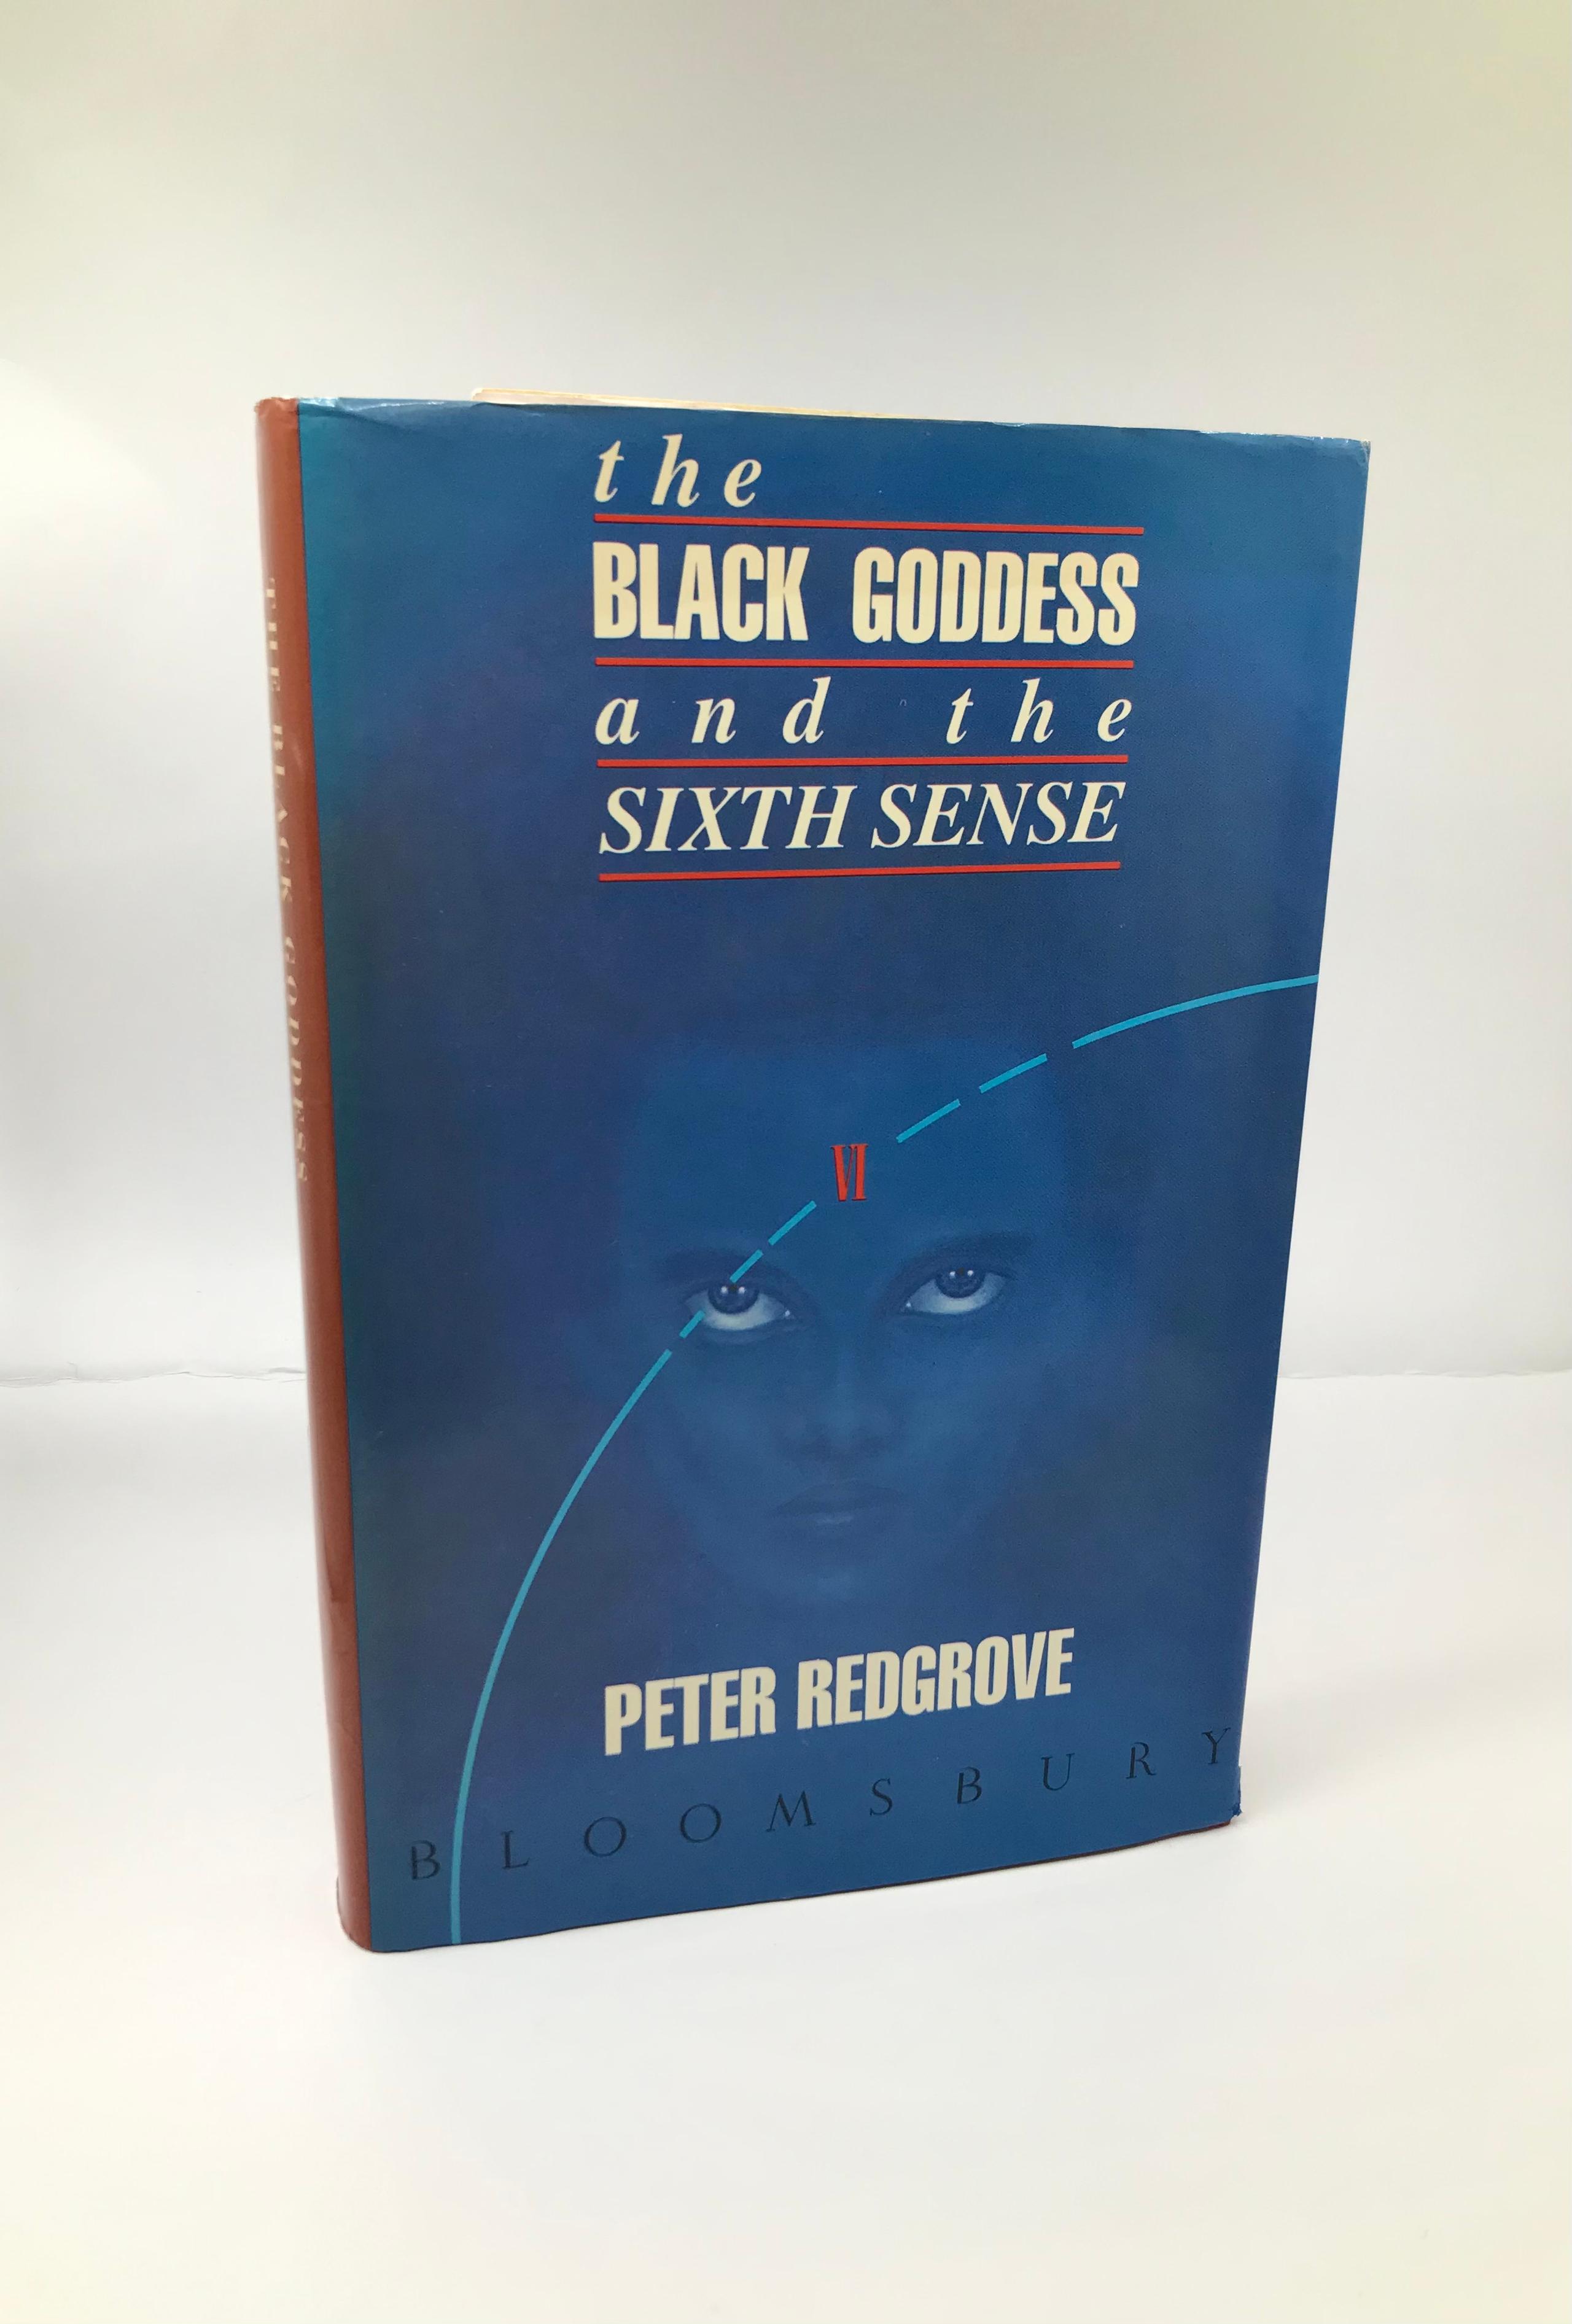 The Black Goddess and the Sixth Sense by Peter Redgrove